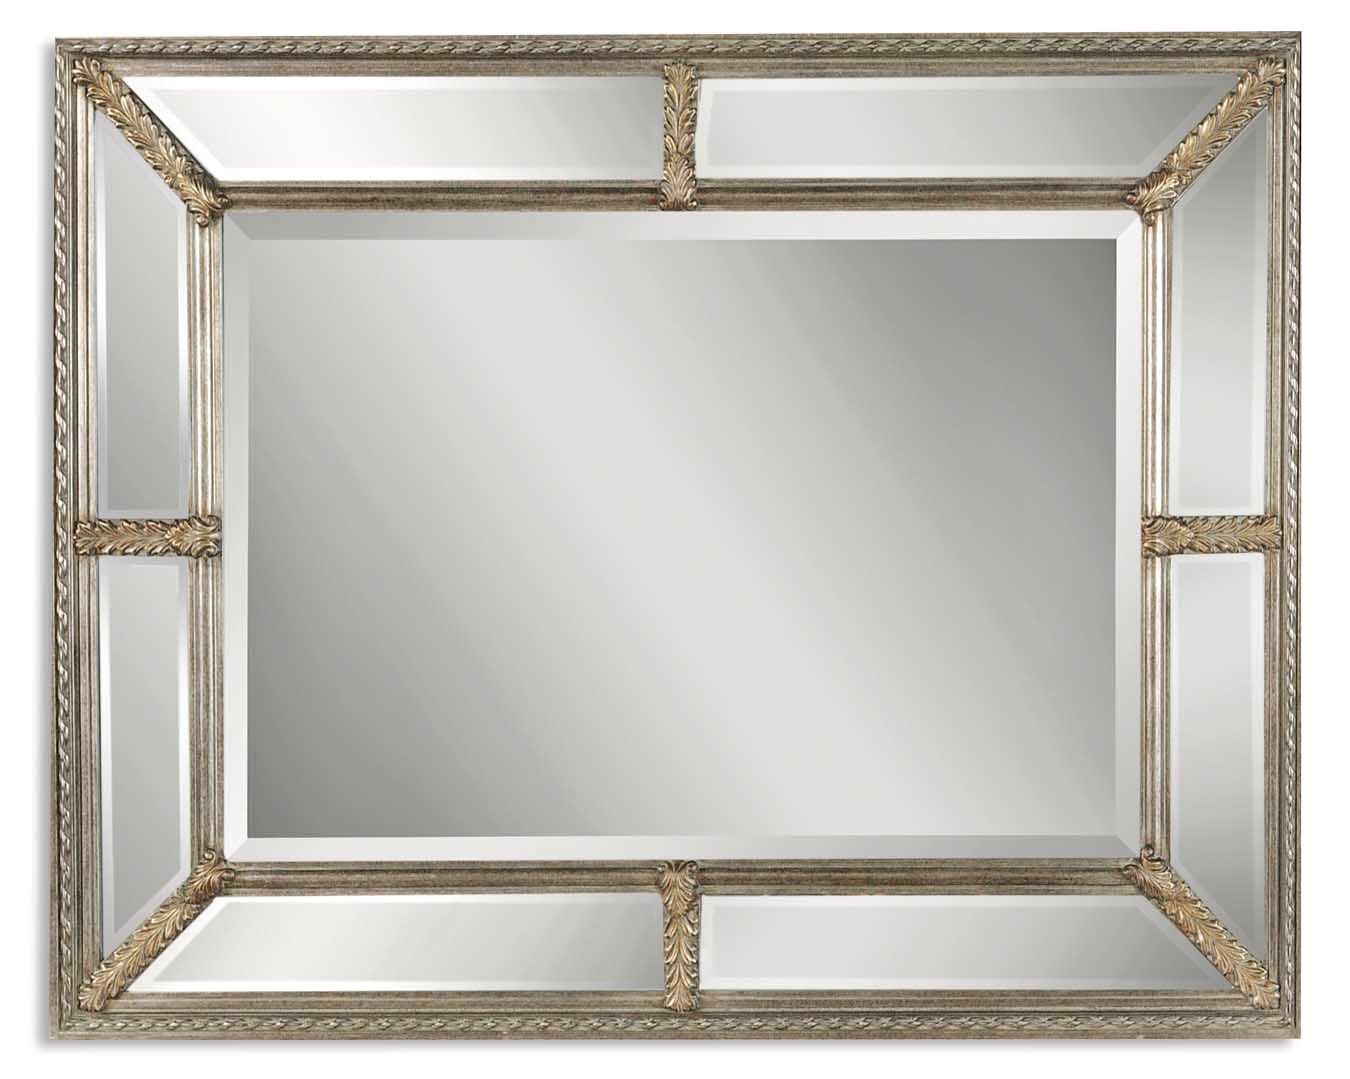 Lucinda Antique Beveled Mirror W/ Decorative Silver & Gold Leaf Frame Intended For Glam Silver Leaf Beaded Wall Mirrors (View 13 of 15)